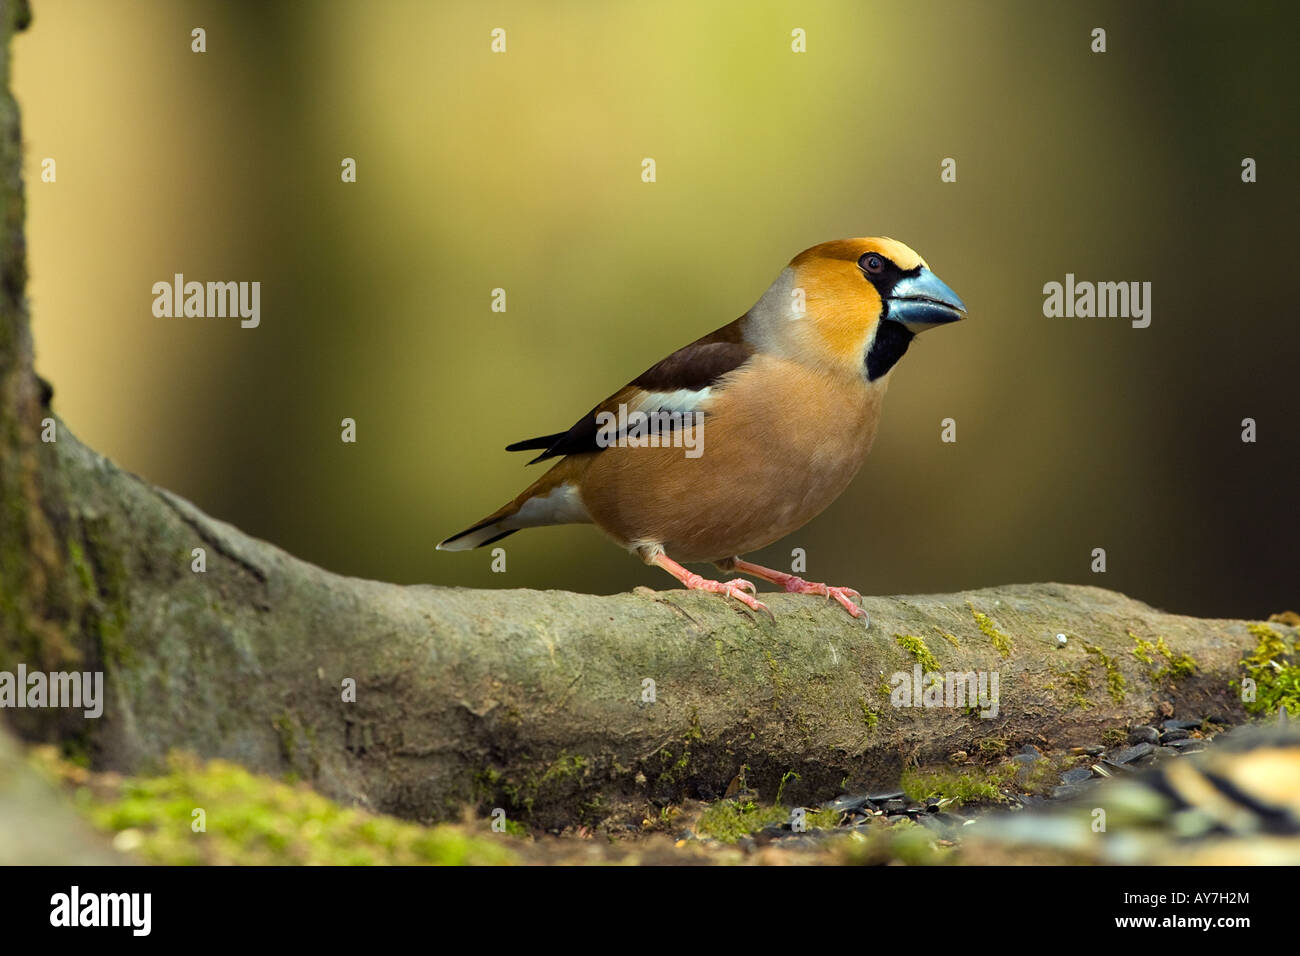 Coccothraustes coccothraustes HAWFINCH Banque D'Images